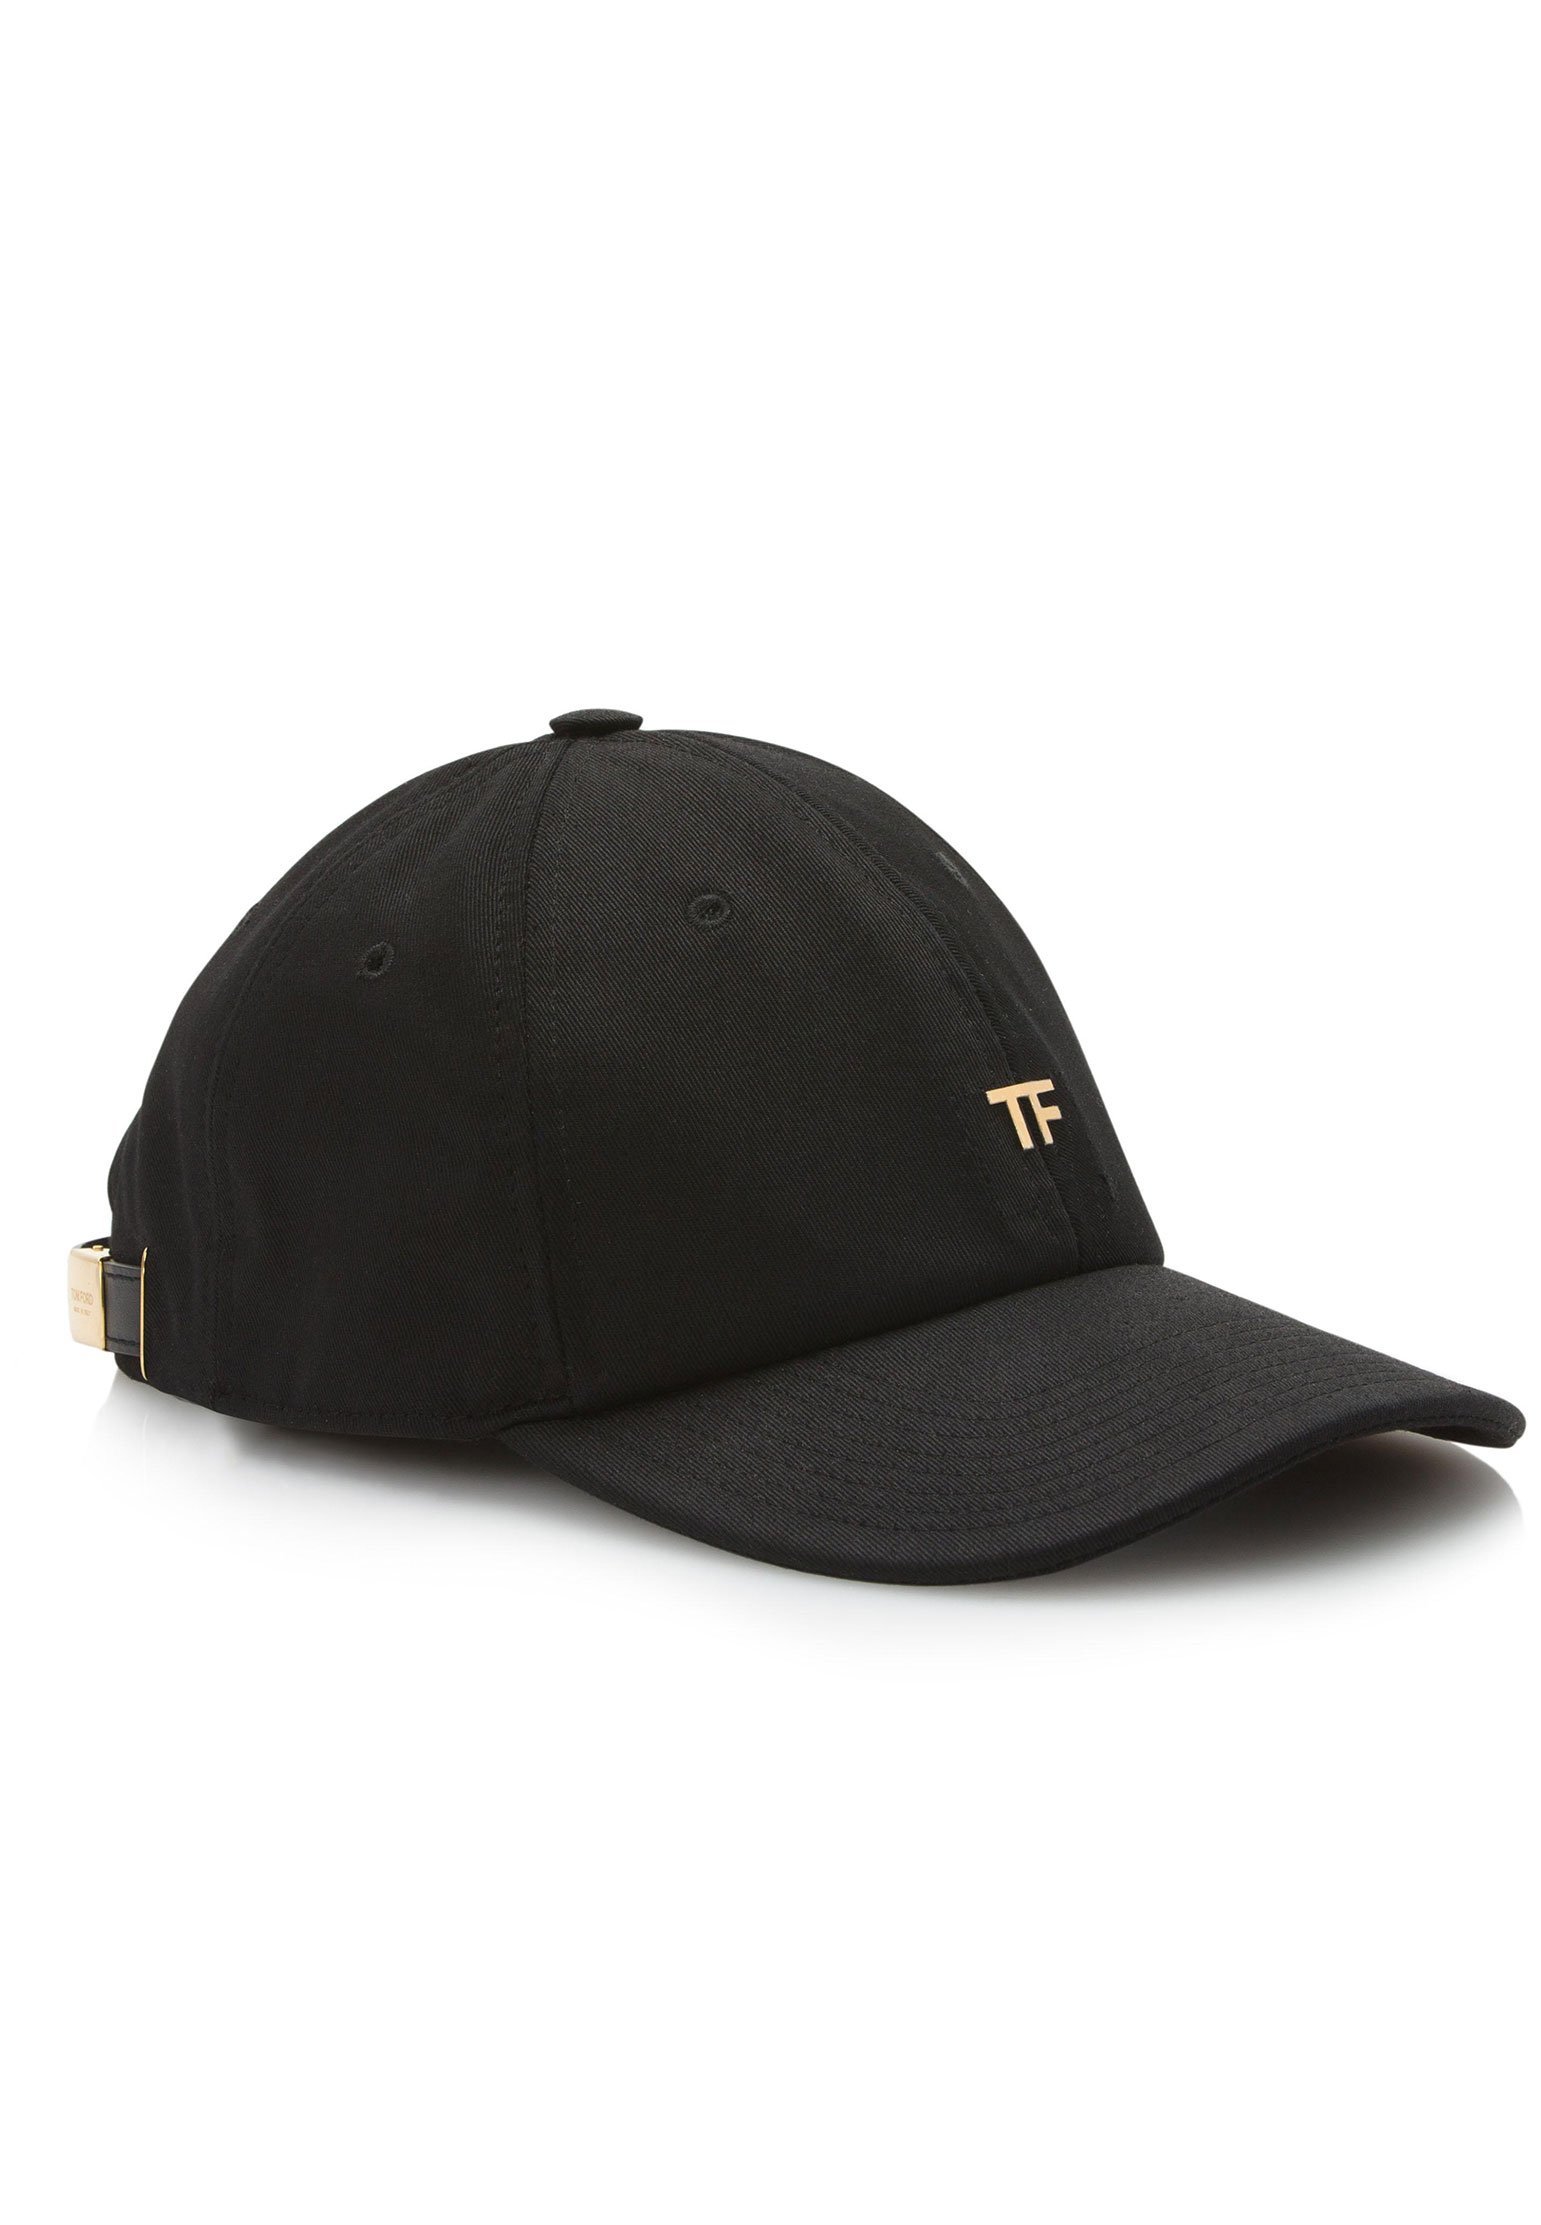 Baceball cap TOM FORD Color: black (Code: 1099) in online store Allure